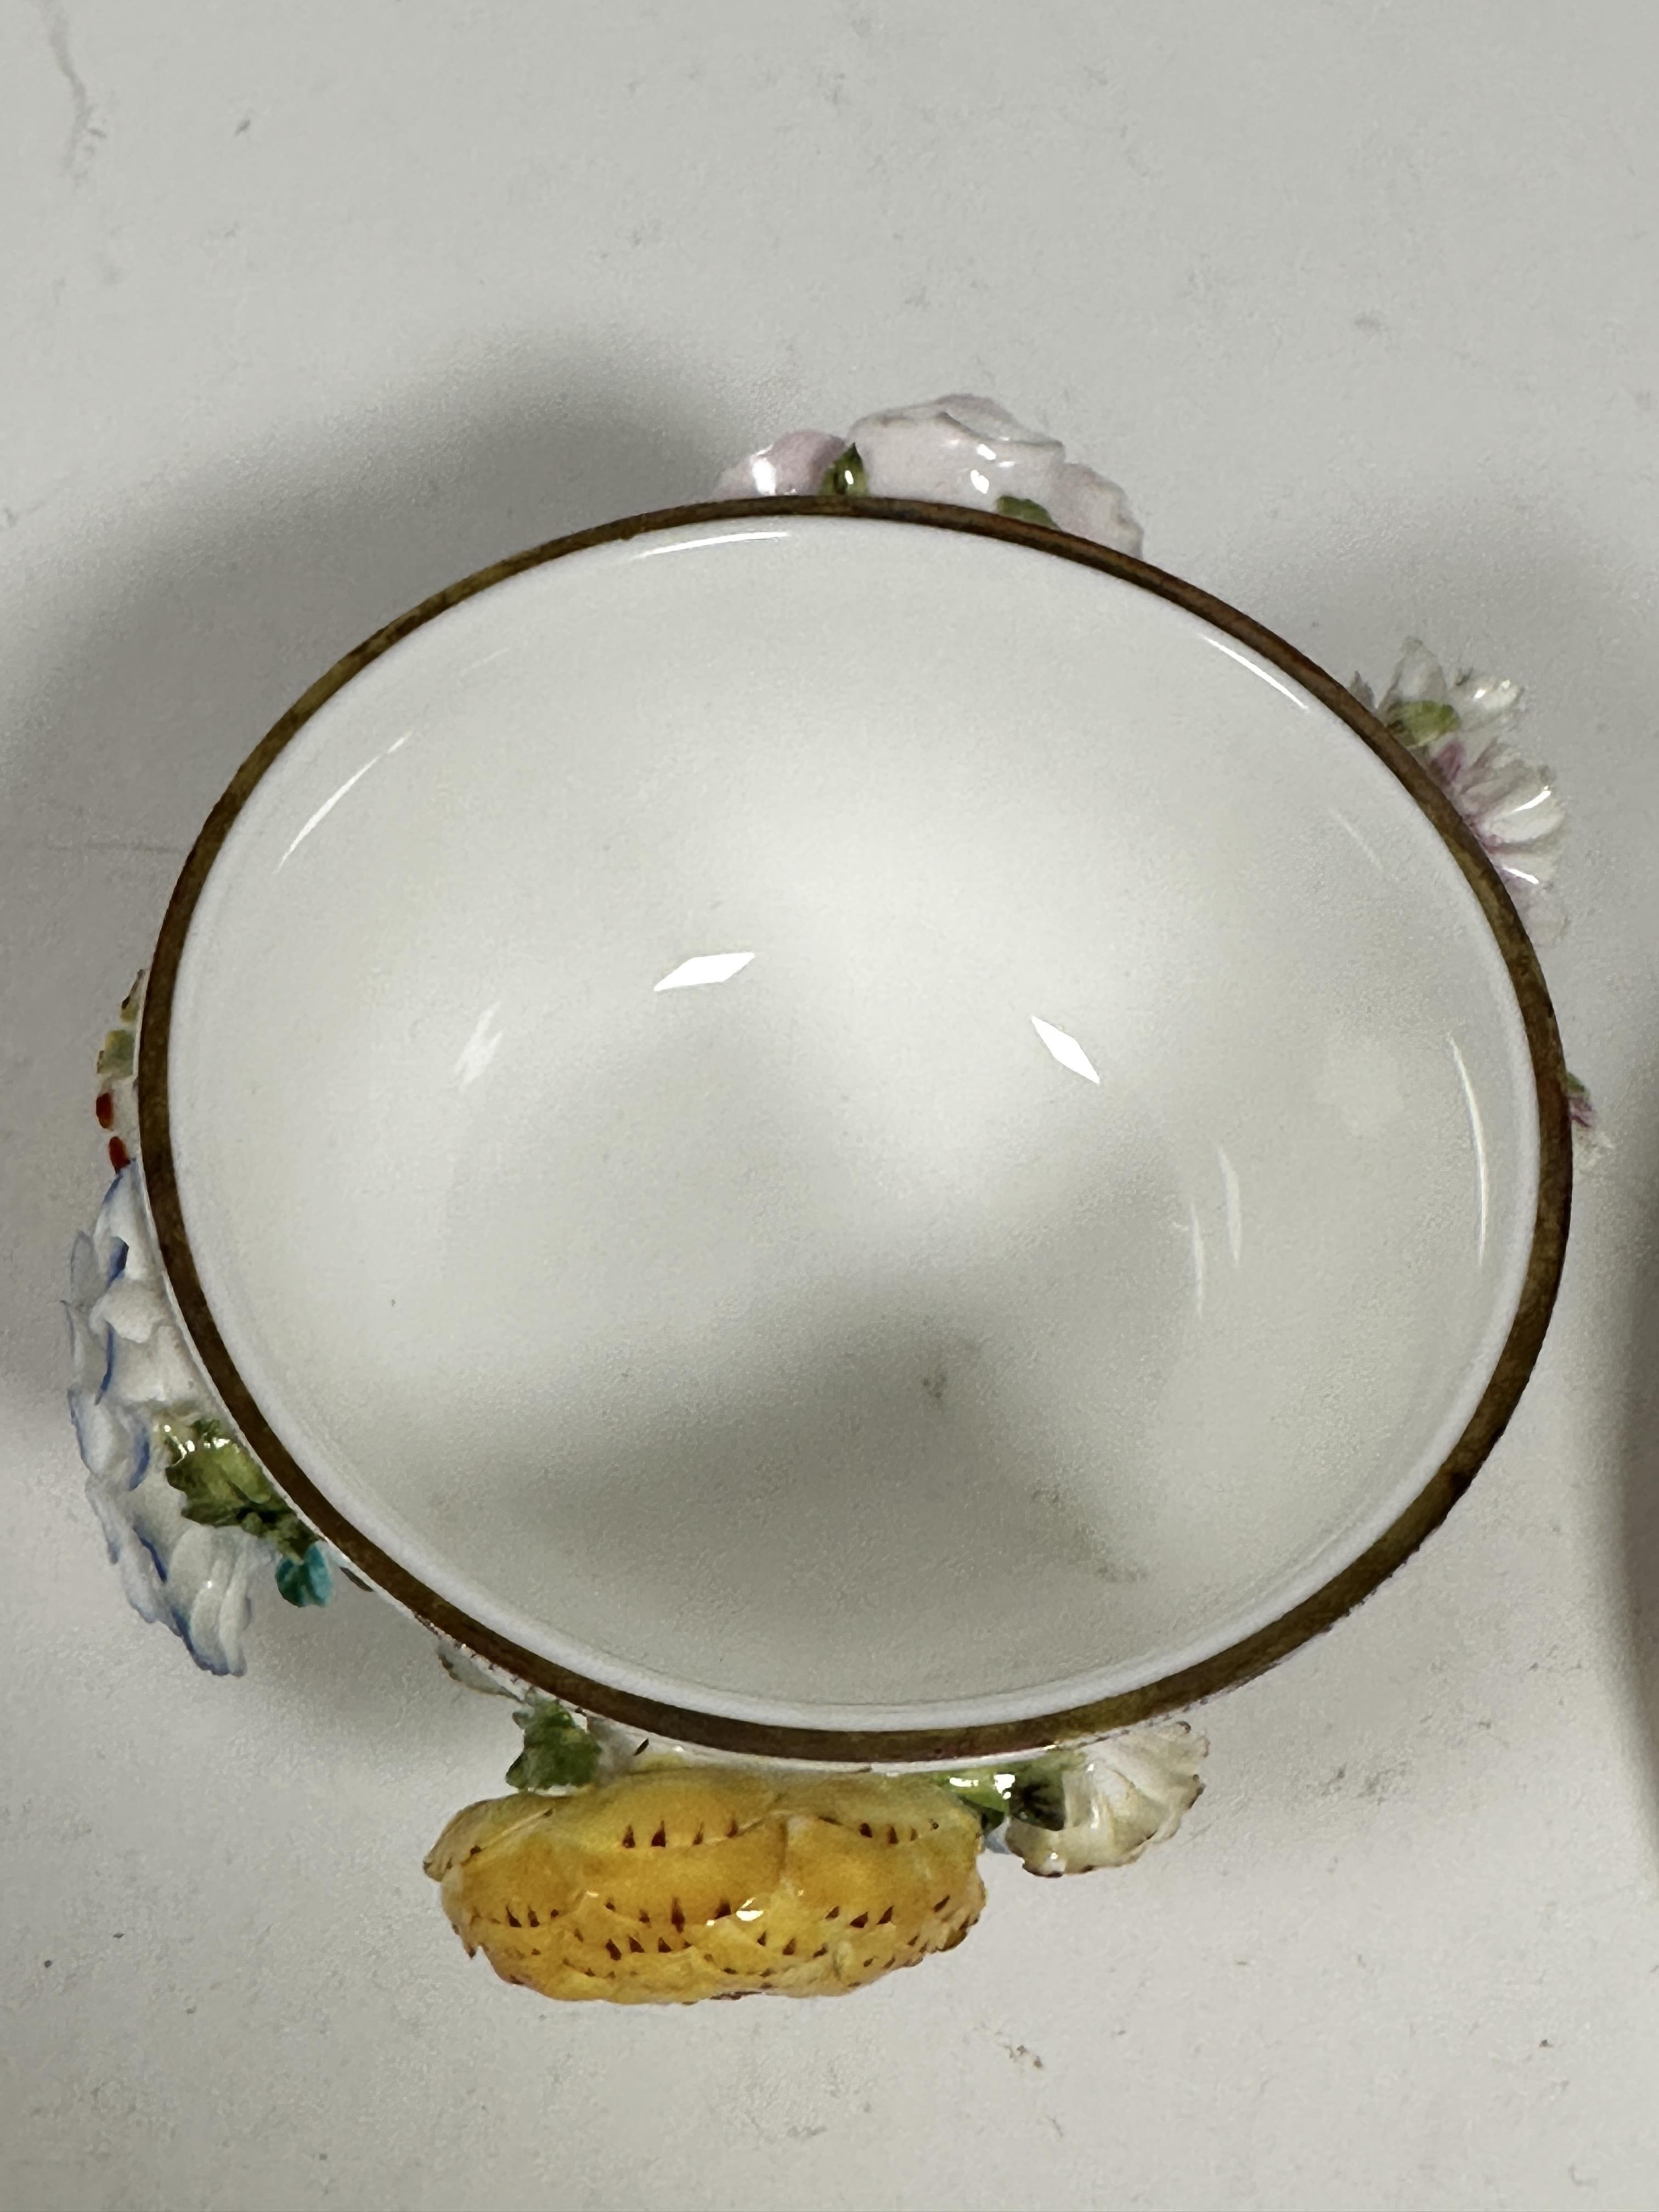 A Coalport Coalbrookdale posy dish and cover decorated in the Coalbrookdale style with floral - Image 5 of 7